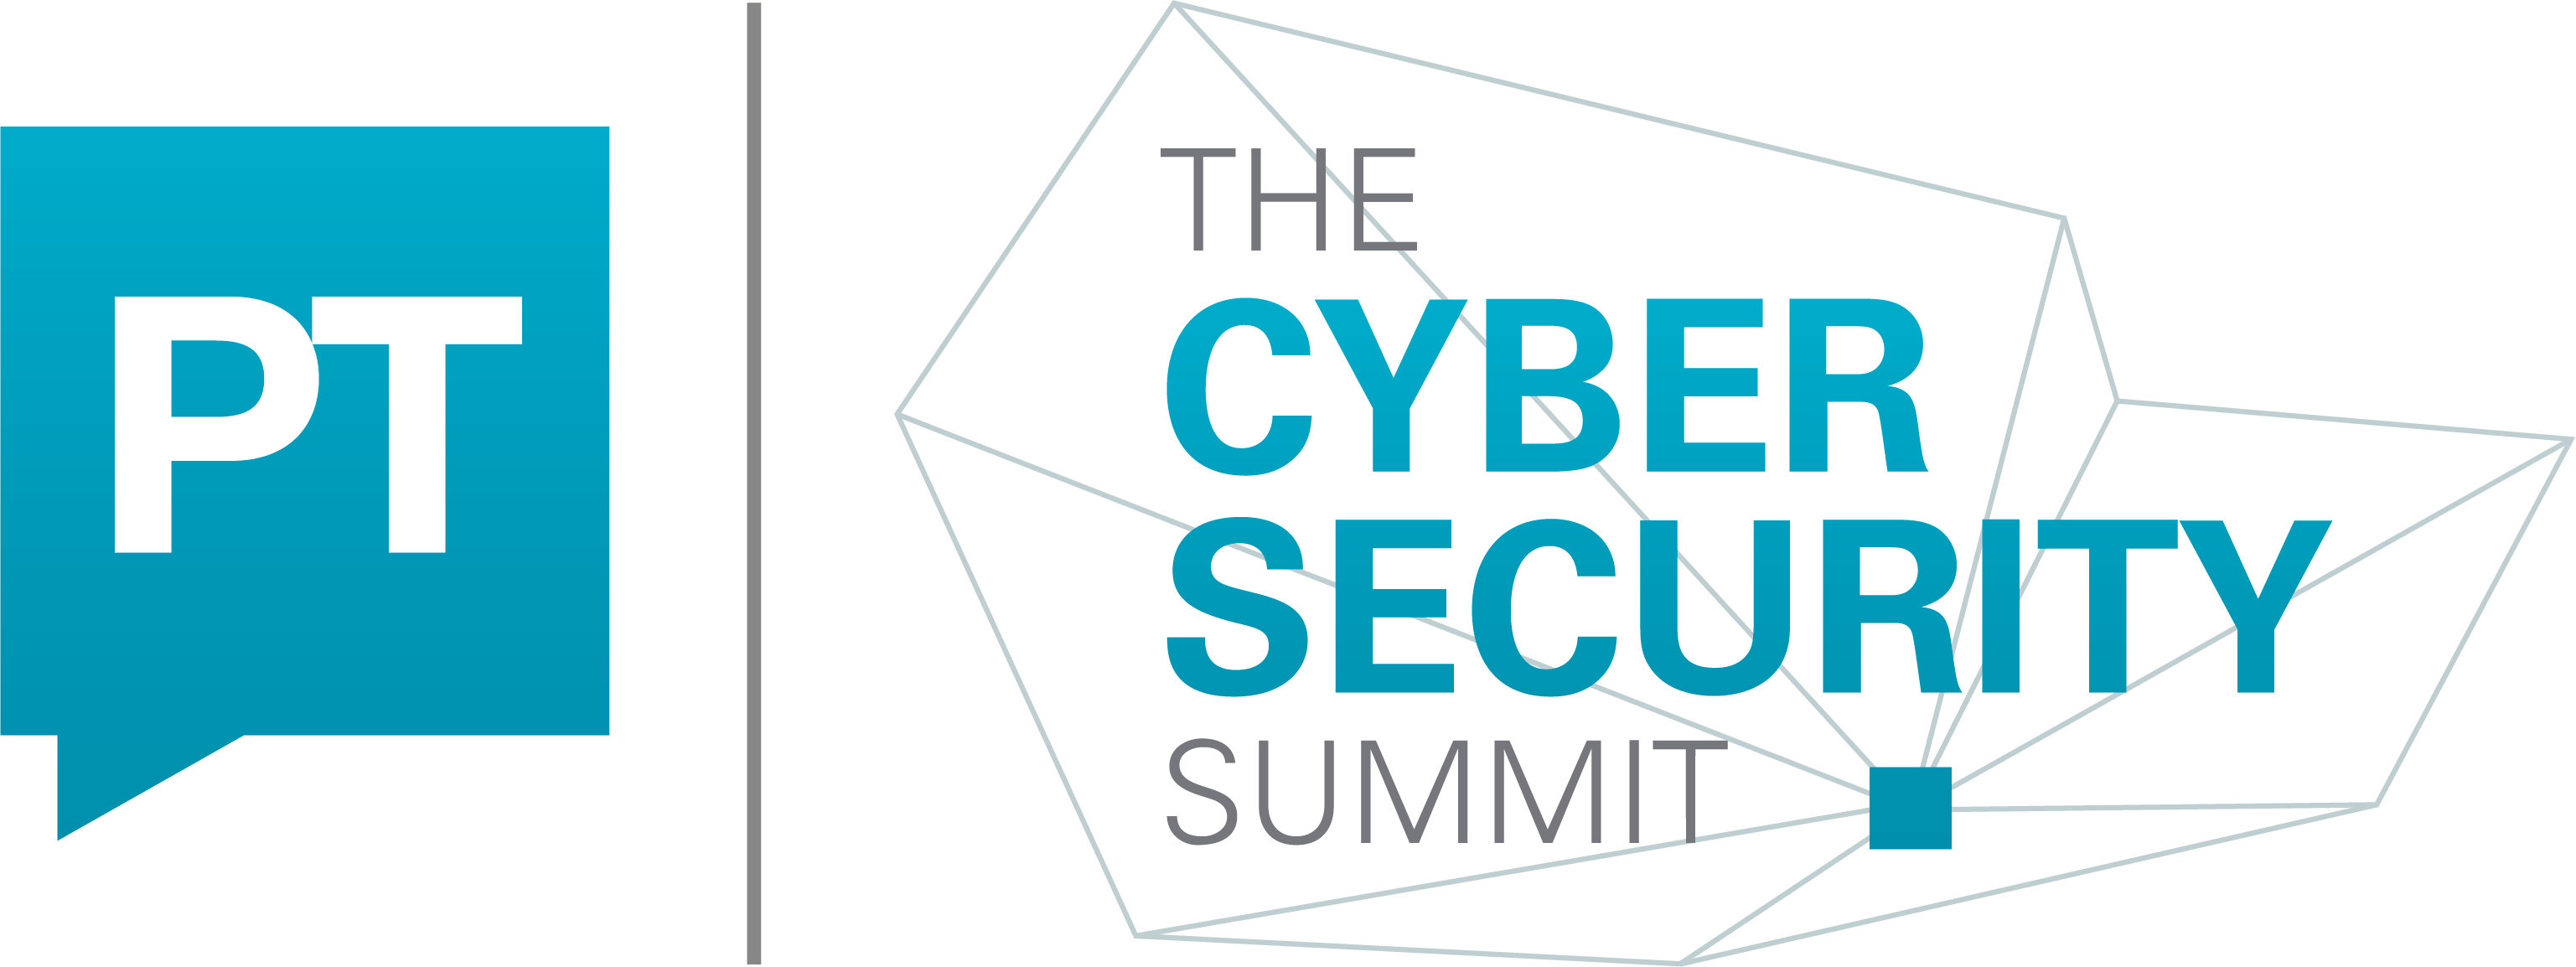 CyberSecurityConference